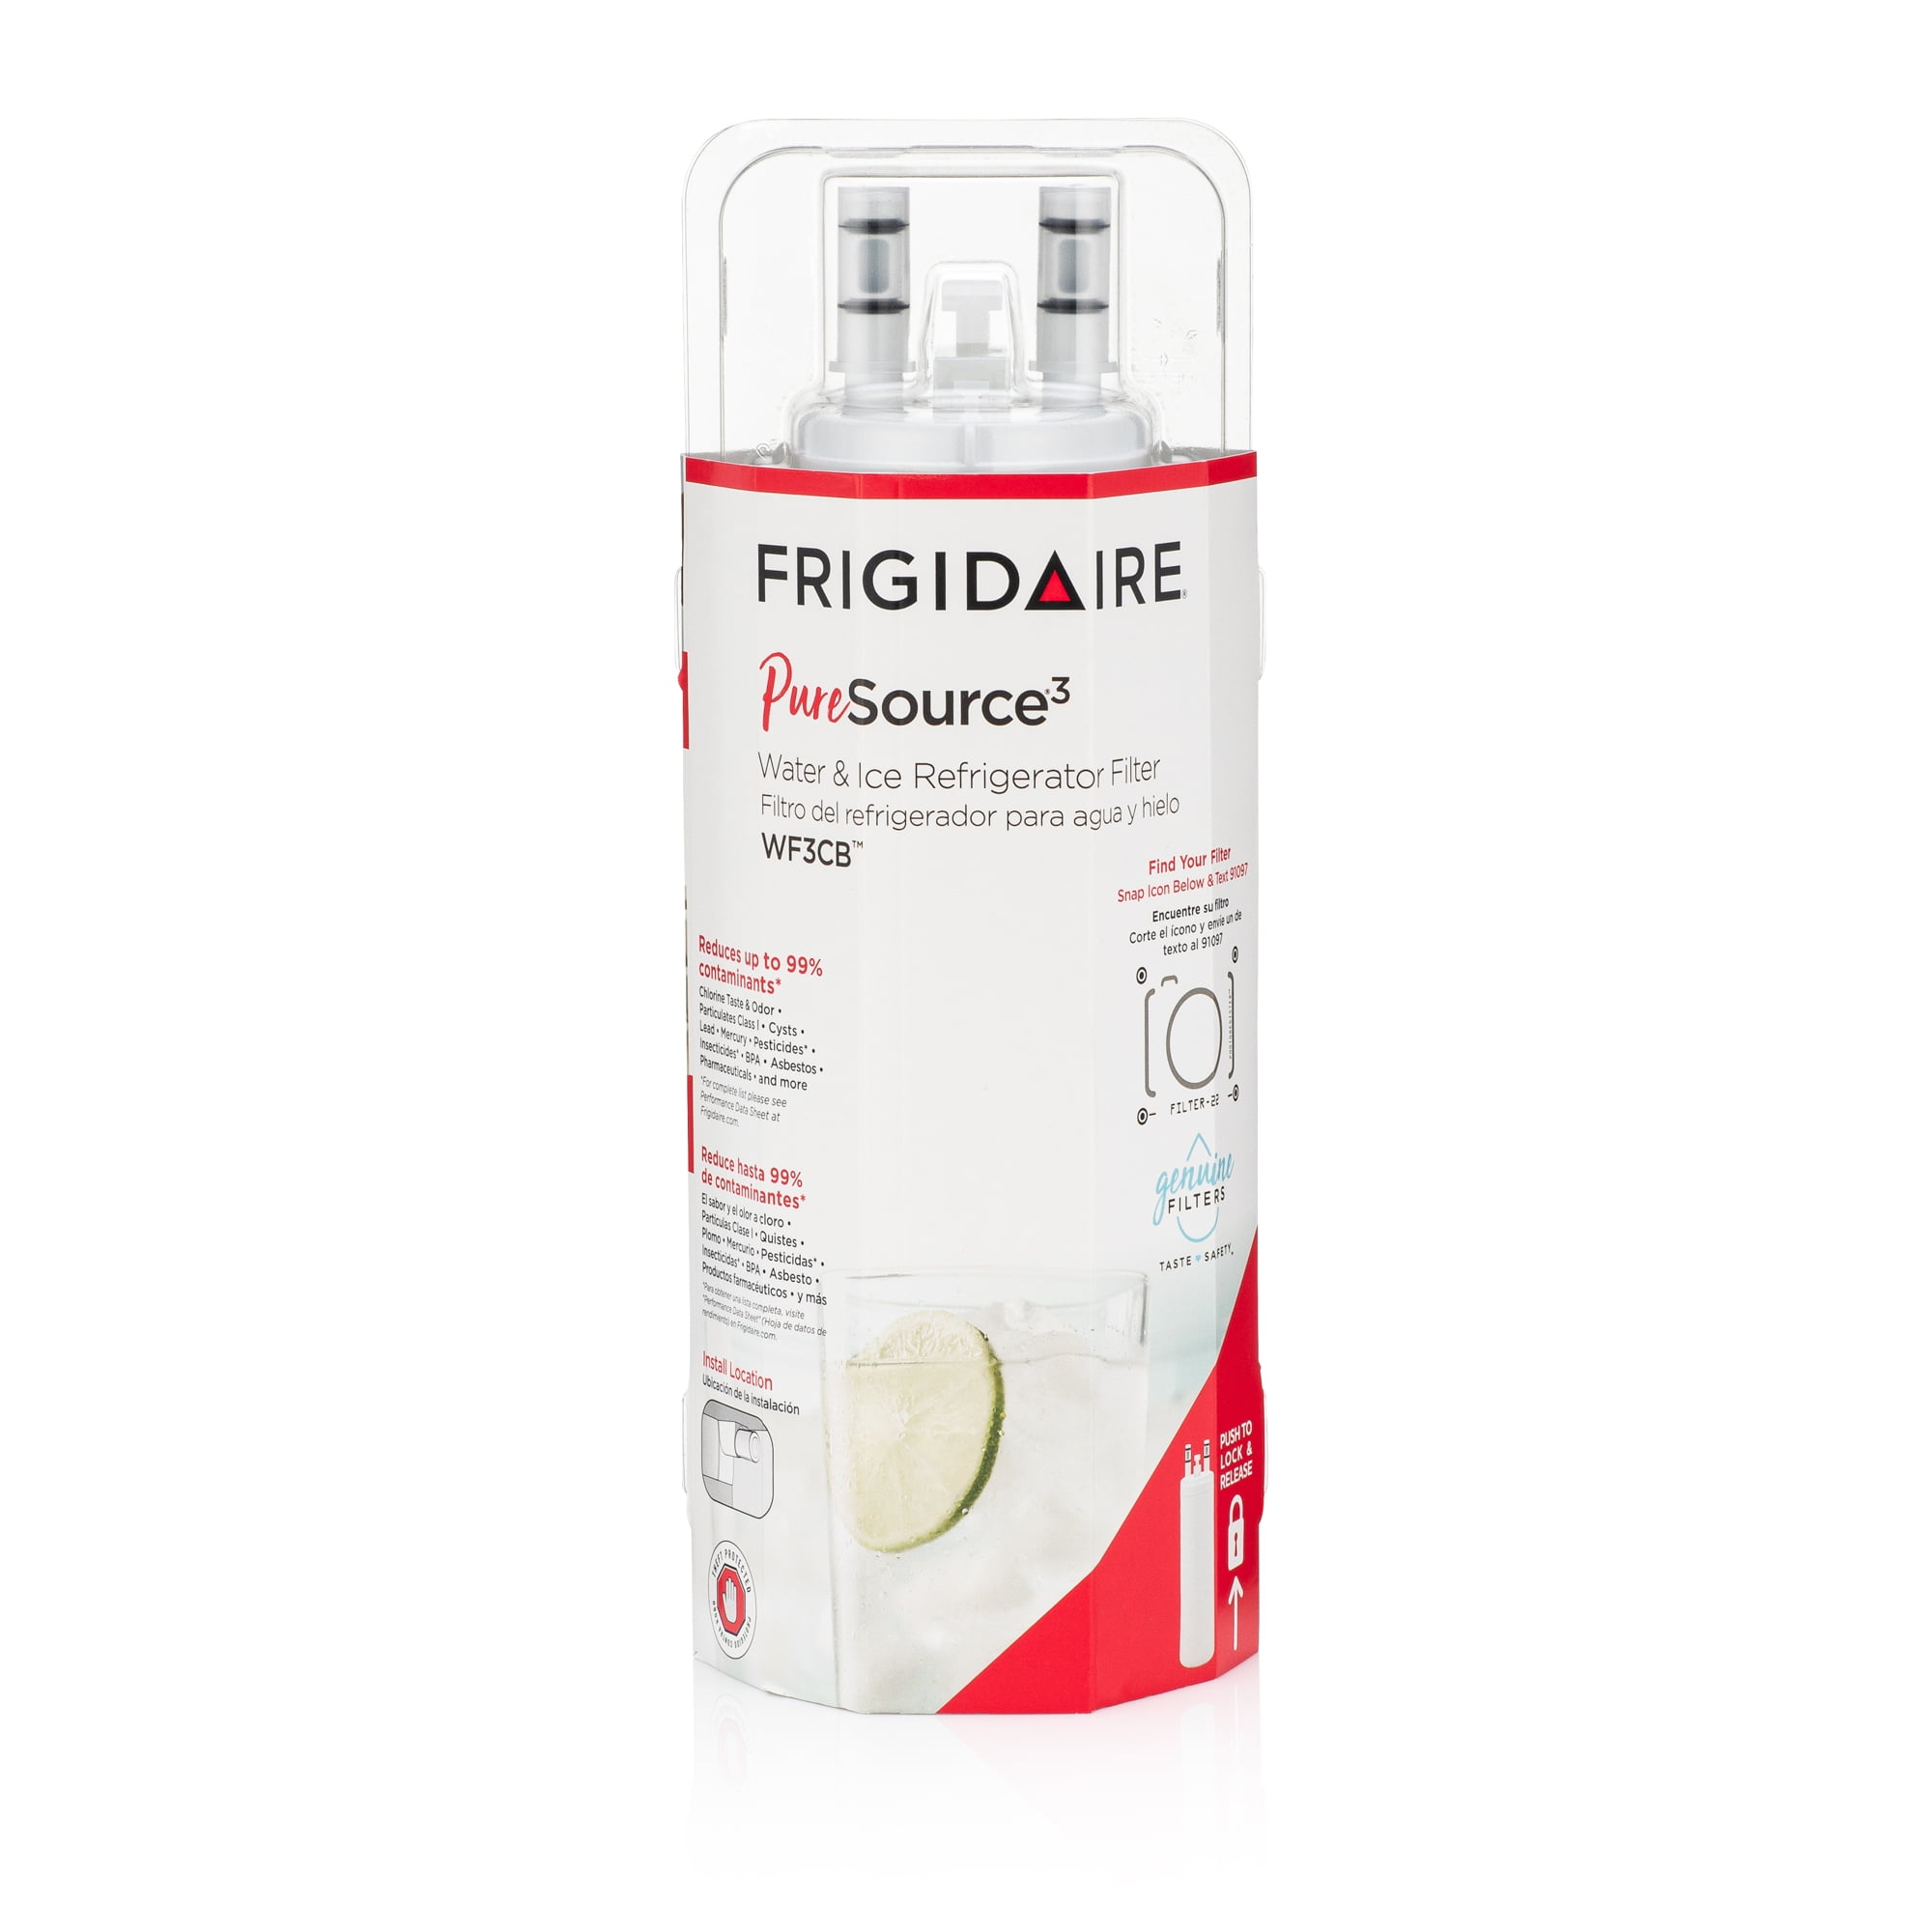 Crystala Frigidaire Water Filter Compatible with Puresource  Gallery  Professional Series Fridge and Some Electrolux Models Crystala Filters CECOMINOD055181 ULTRAWF Compatible Cartridge For Frigidaire Refrigerators & Ice Makers